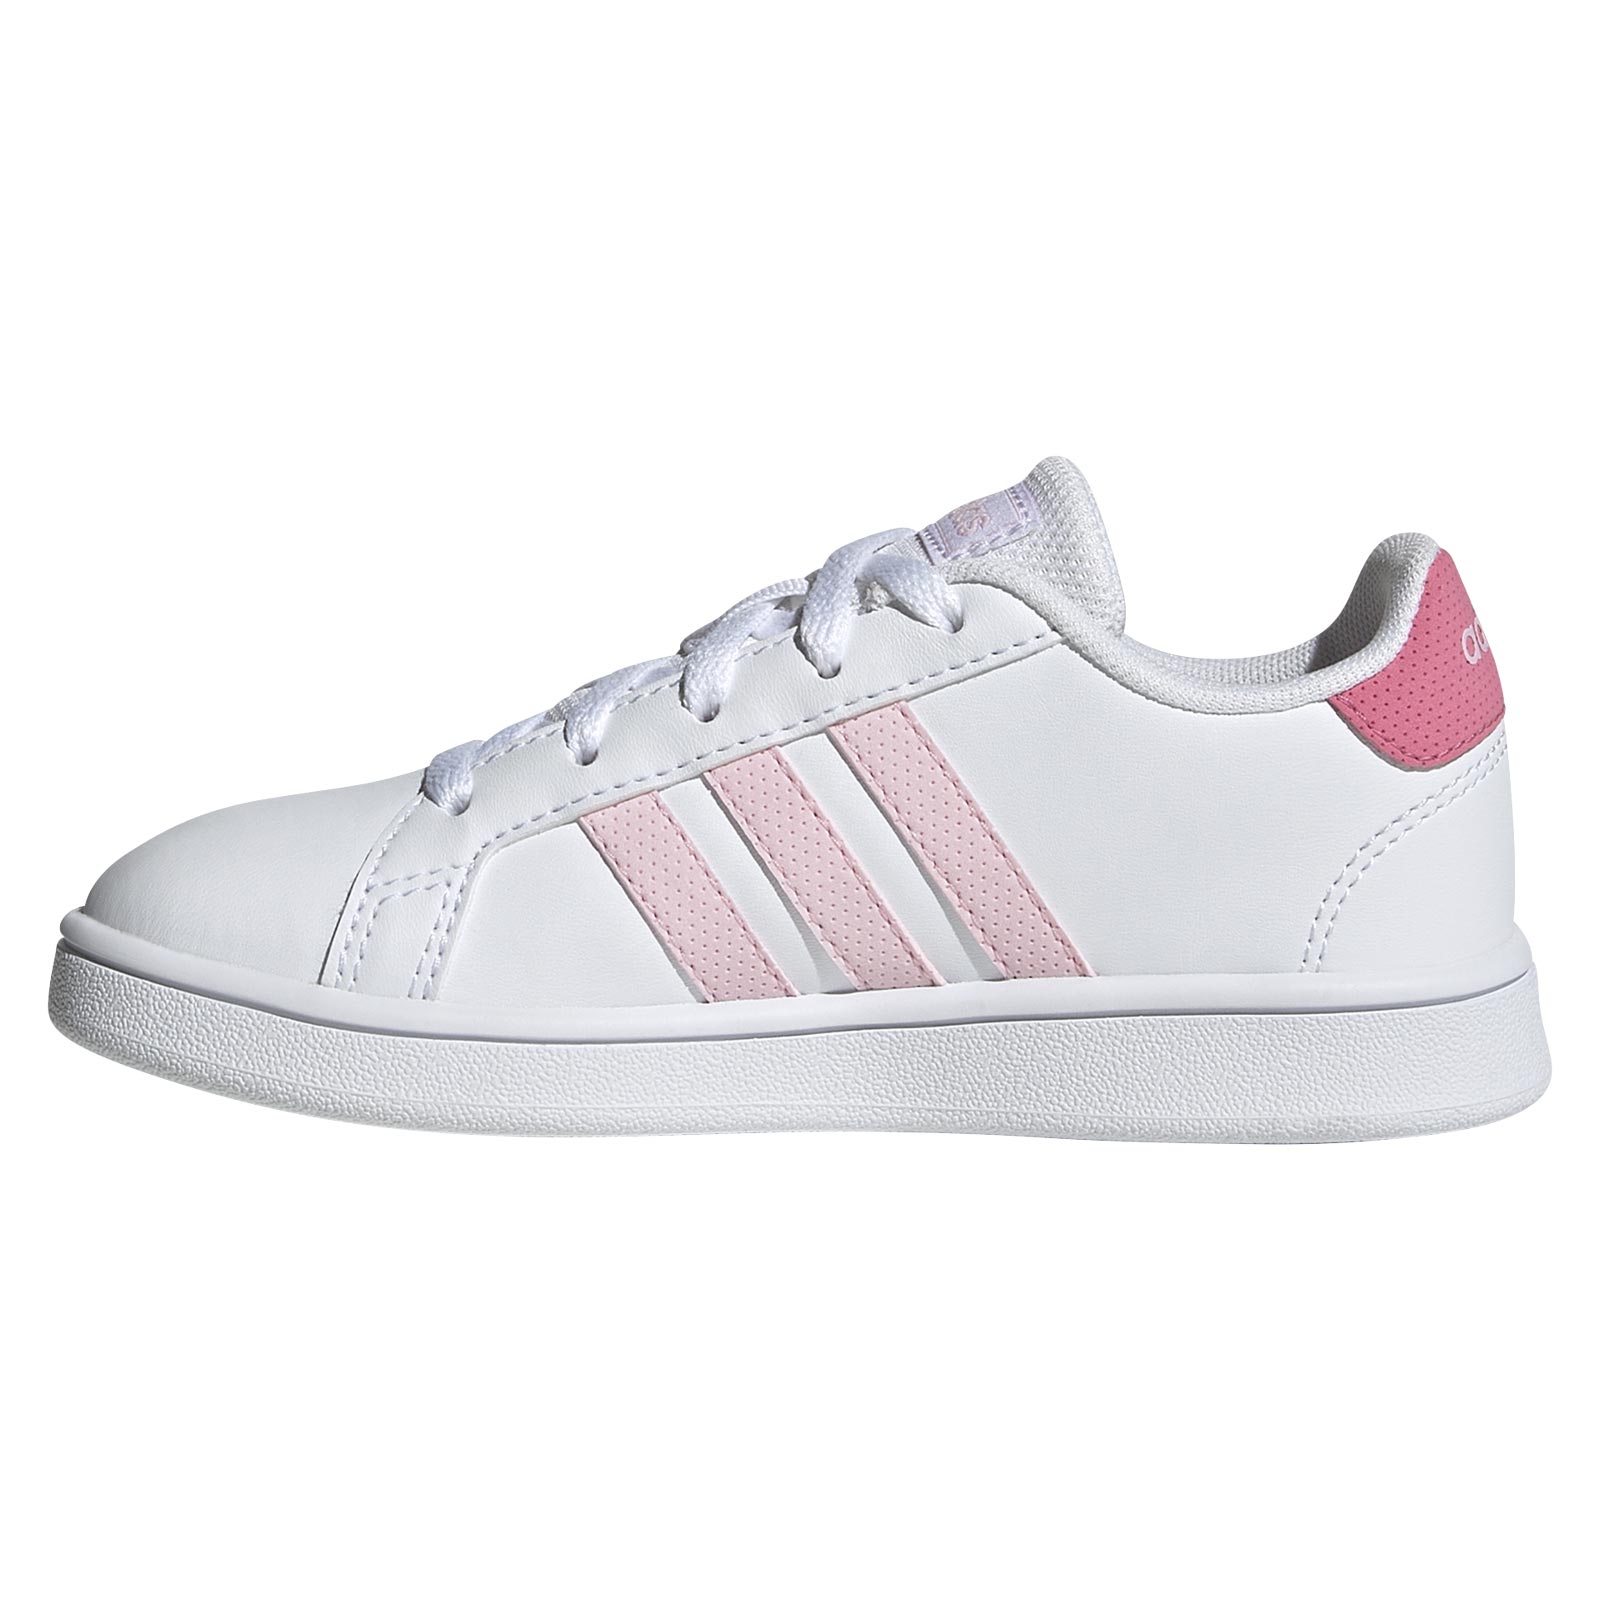 adidas GRAND COURT Girls Shoes